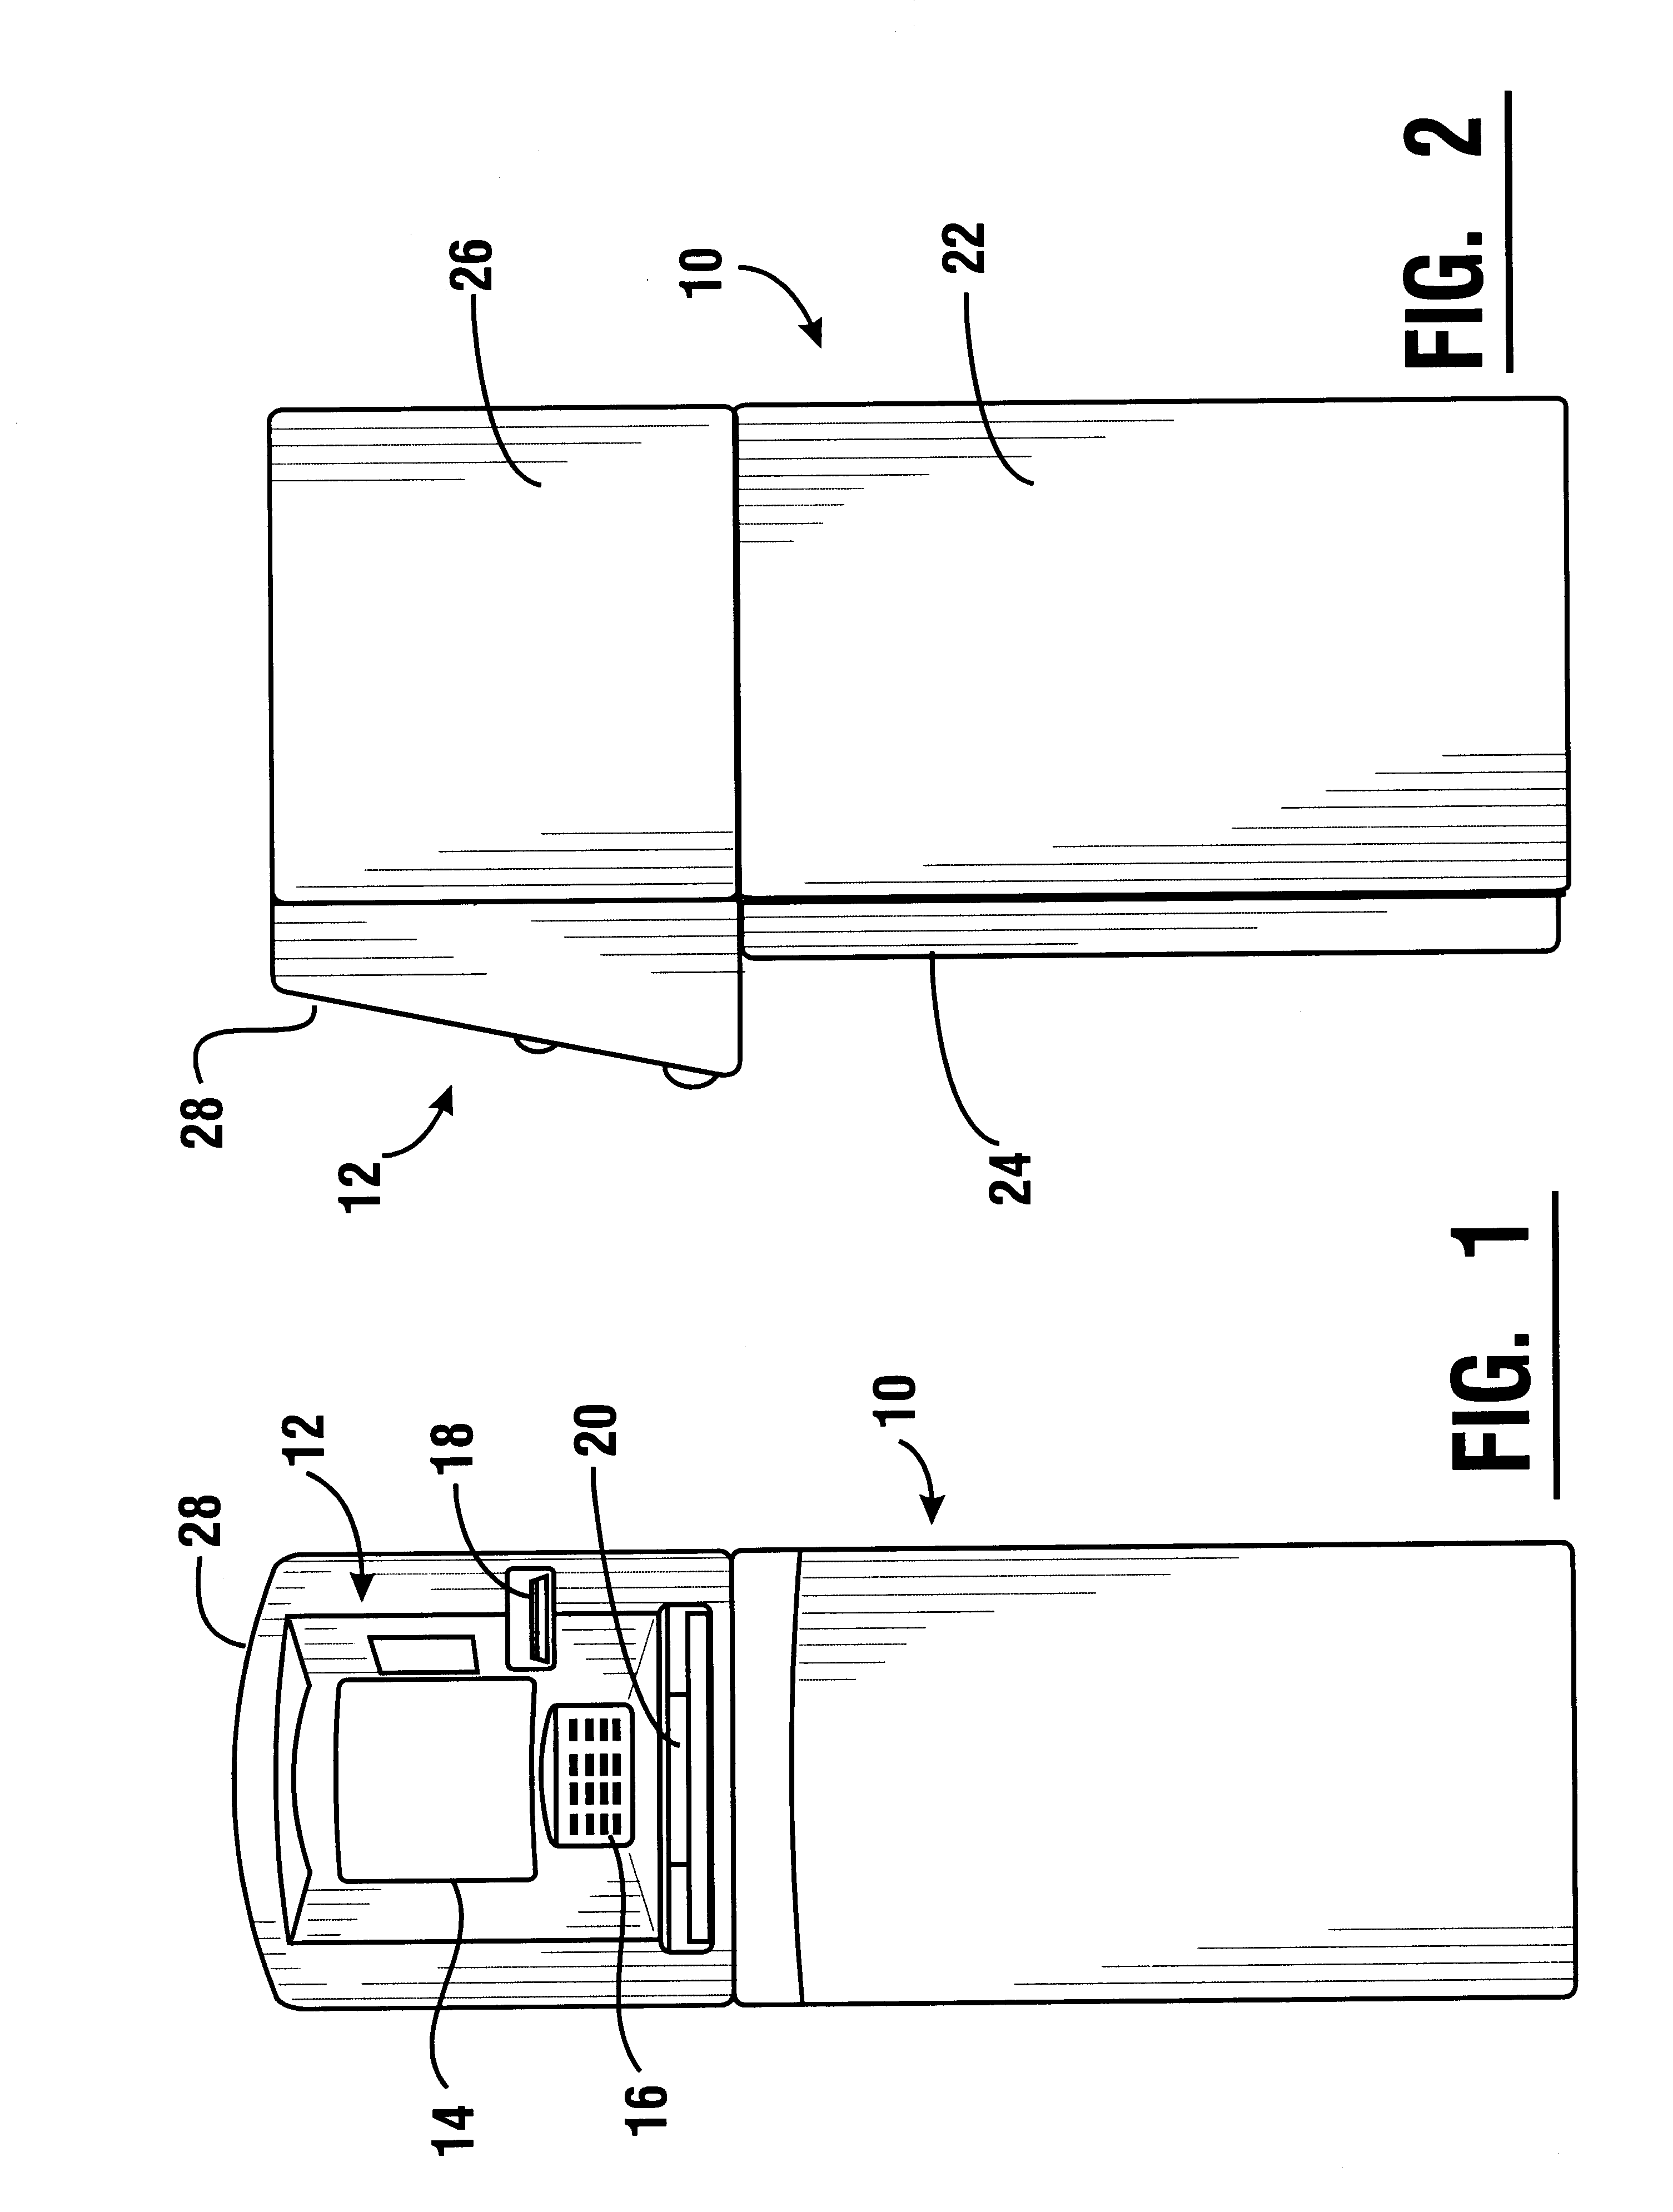 Automated banking machine with sheet directing apparatus